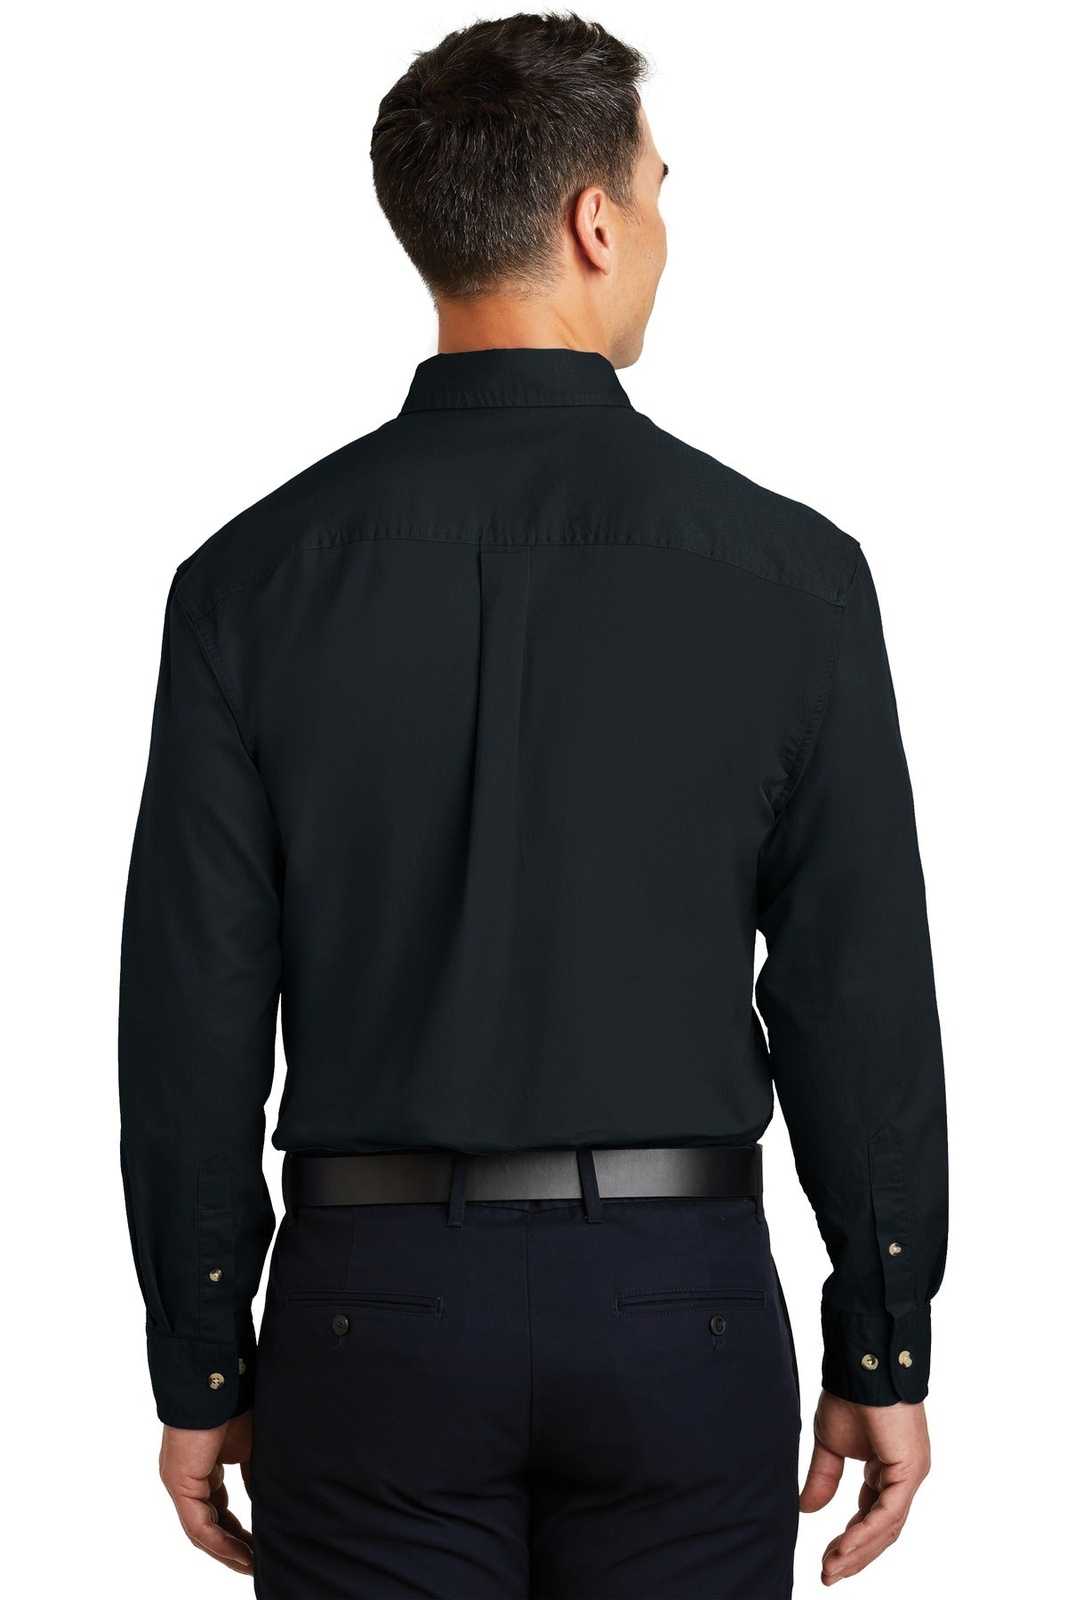 Port Authority S600T Long Sleeve Twill Shirt - Classic Navy - HIT a Double - 1